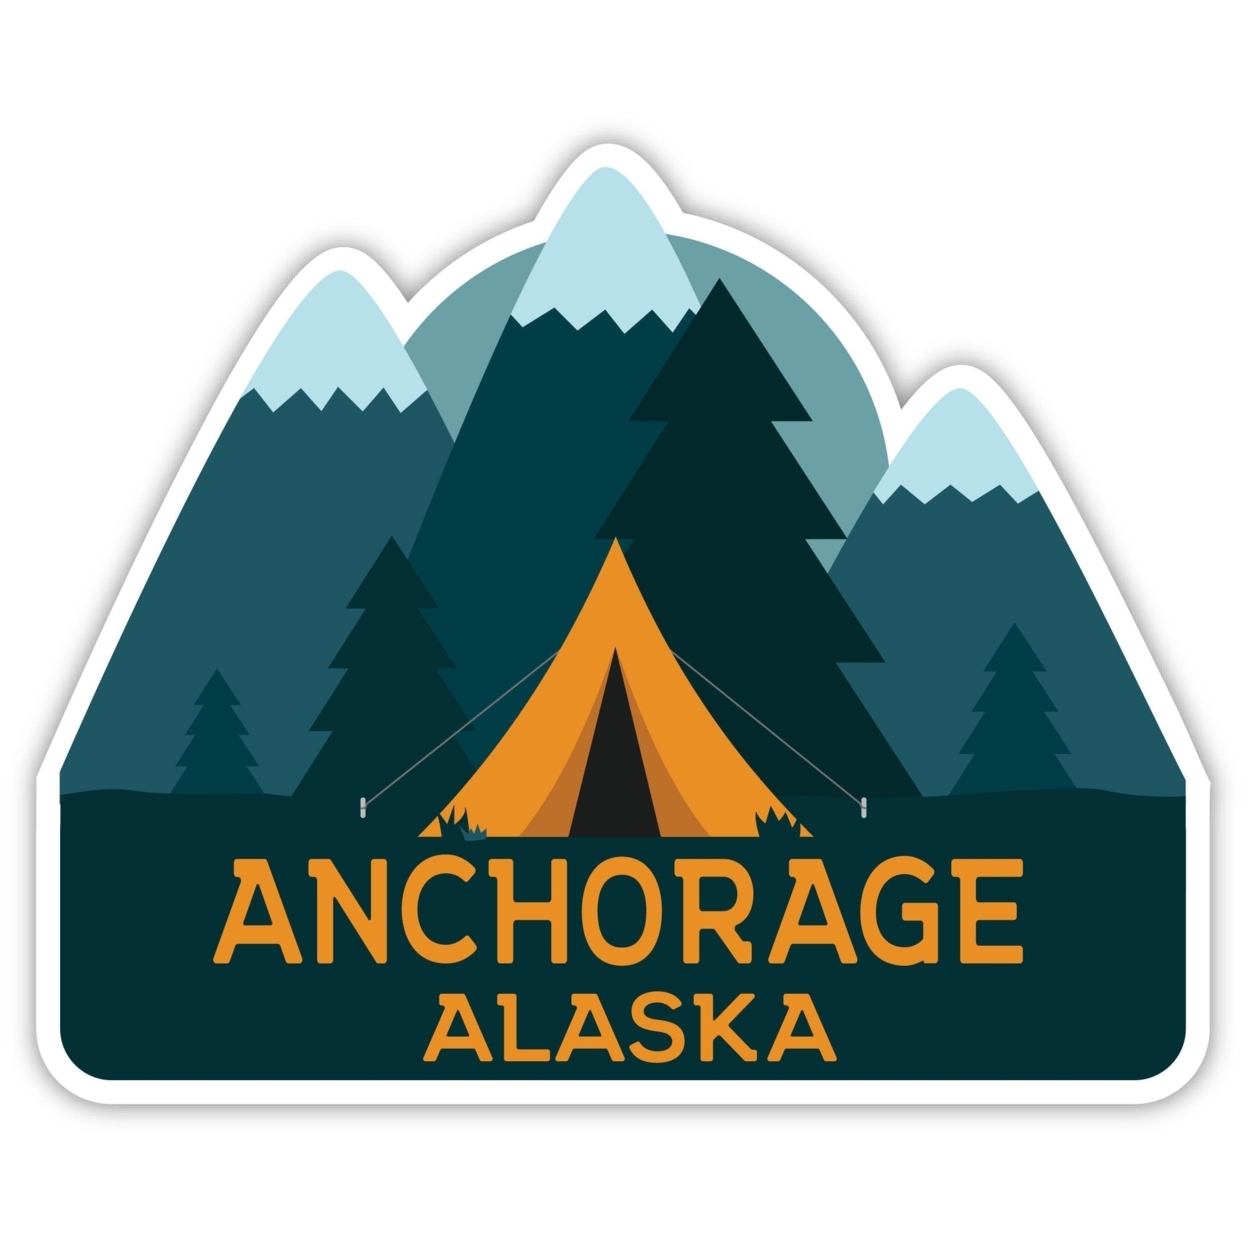 Anchorage Alaska Souvenir Decorative Stickers (Choose Theme And Size) - 4-Pack, 4-Inch, Tent